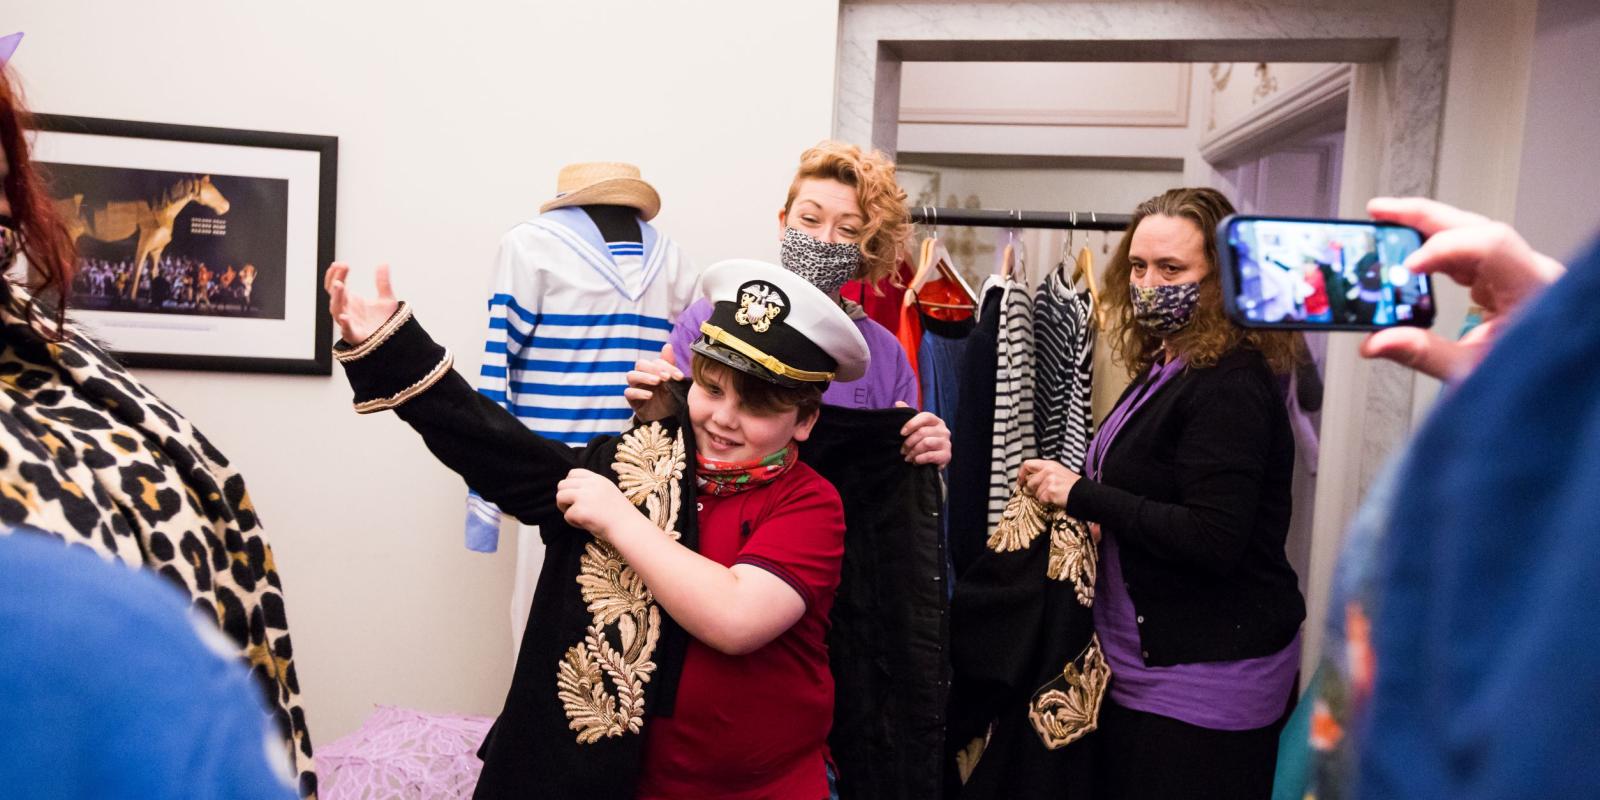 Trying on costumes at our Relaxed Performance of HMS Pinafore